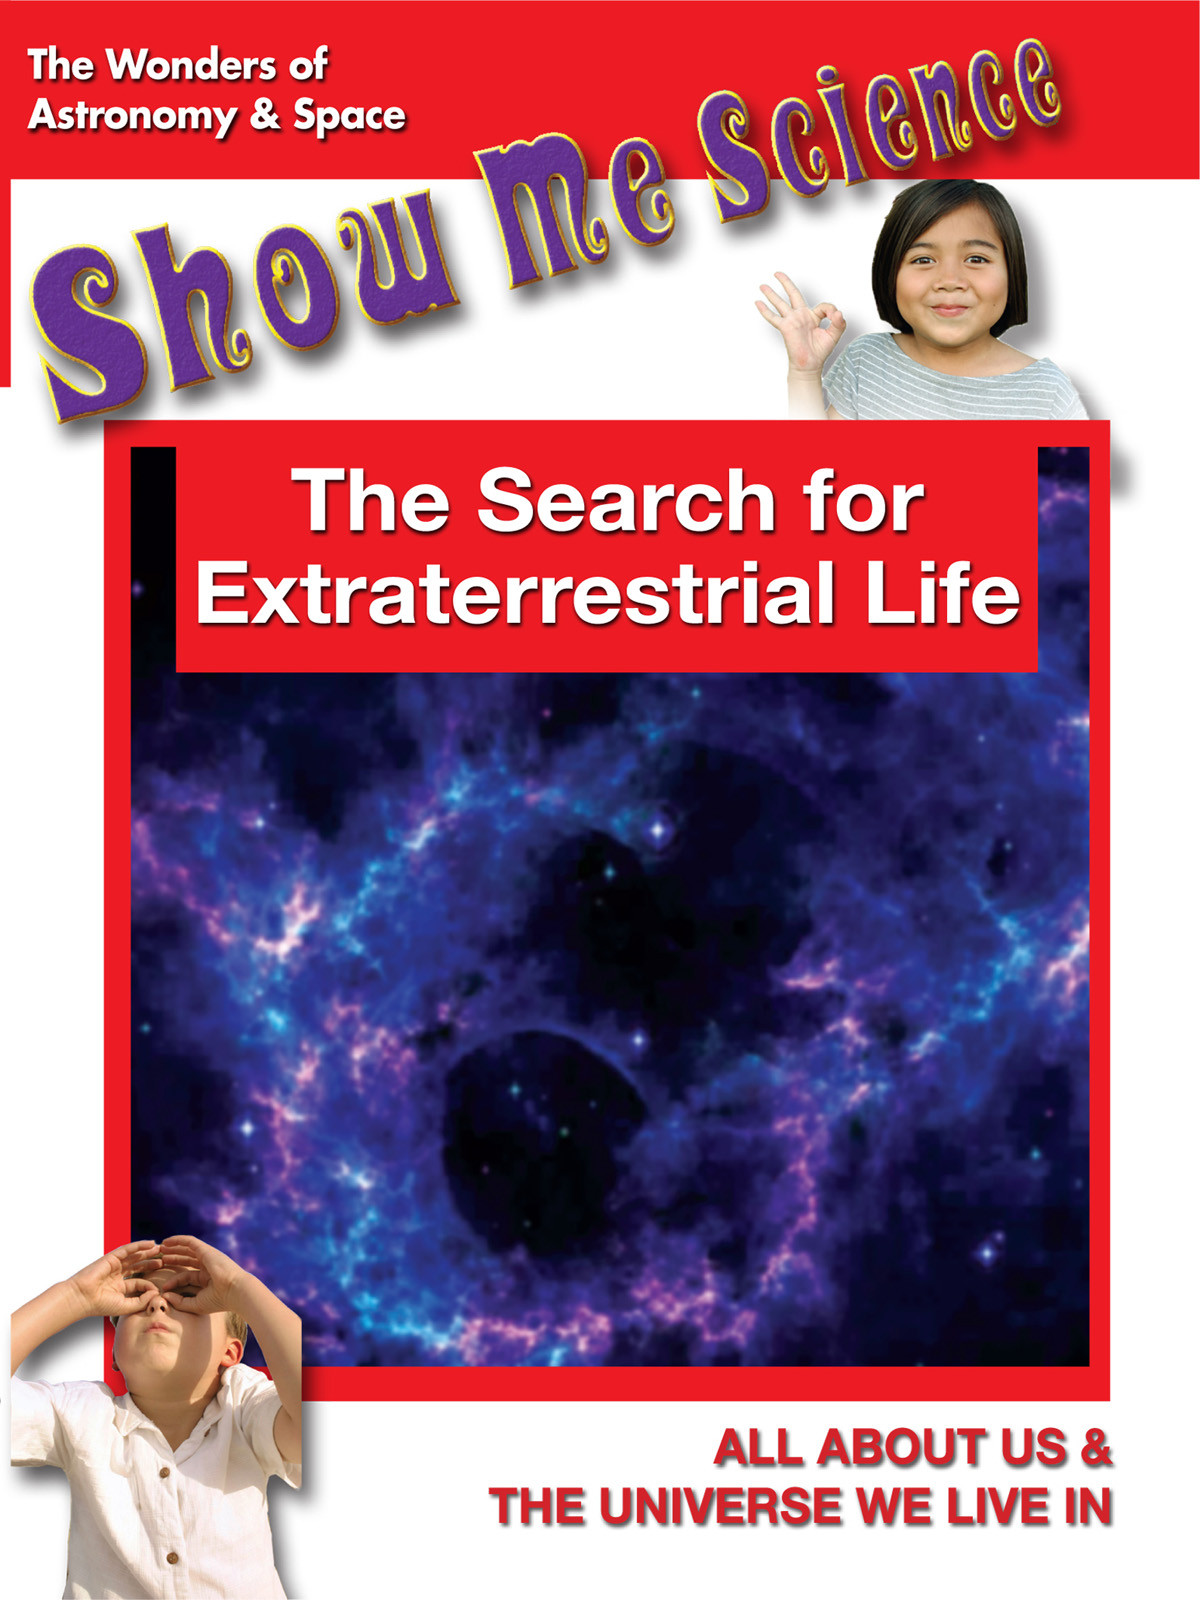 K4651 - The Search for Extraterrestrial Life